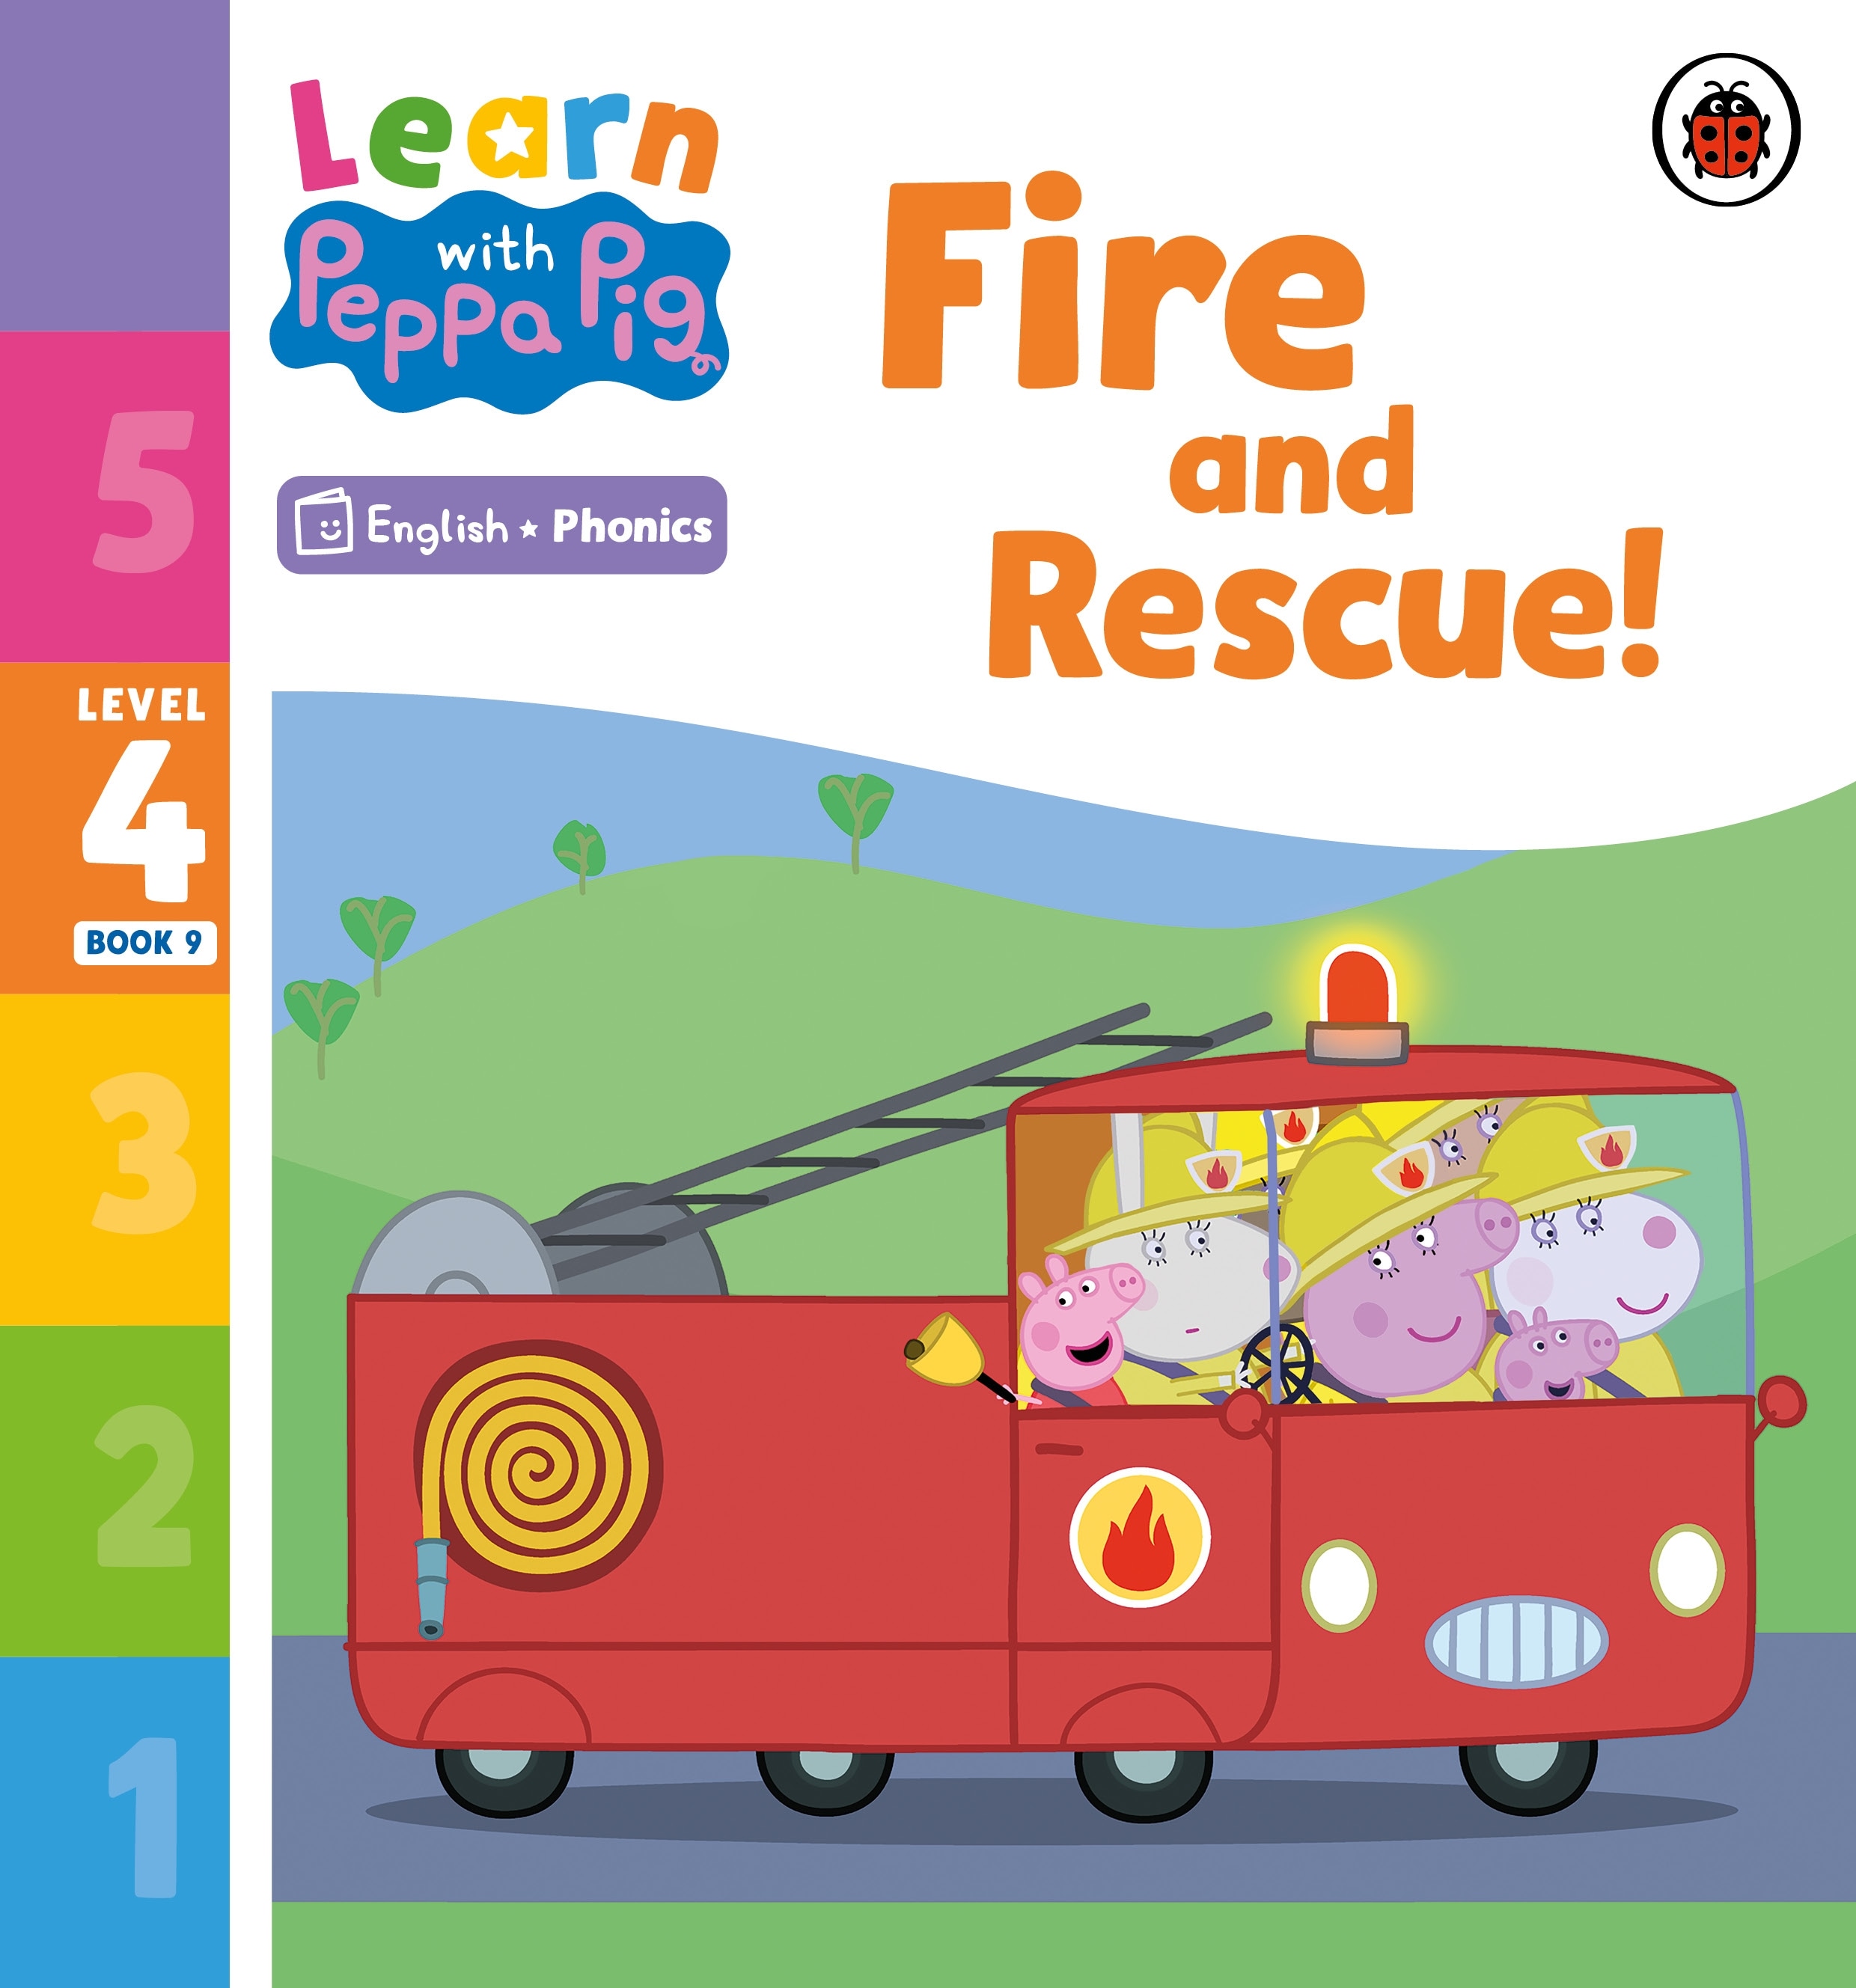 Learn with Peppa Phonics Level 4 Book 9 — Fire and Rescue! (Phonics Reader)